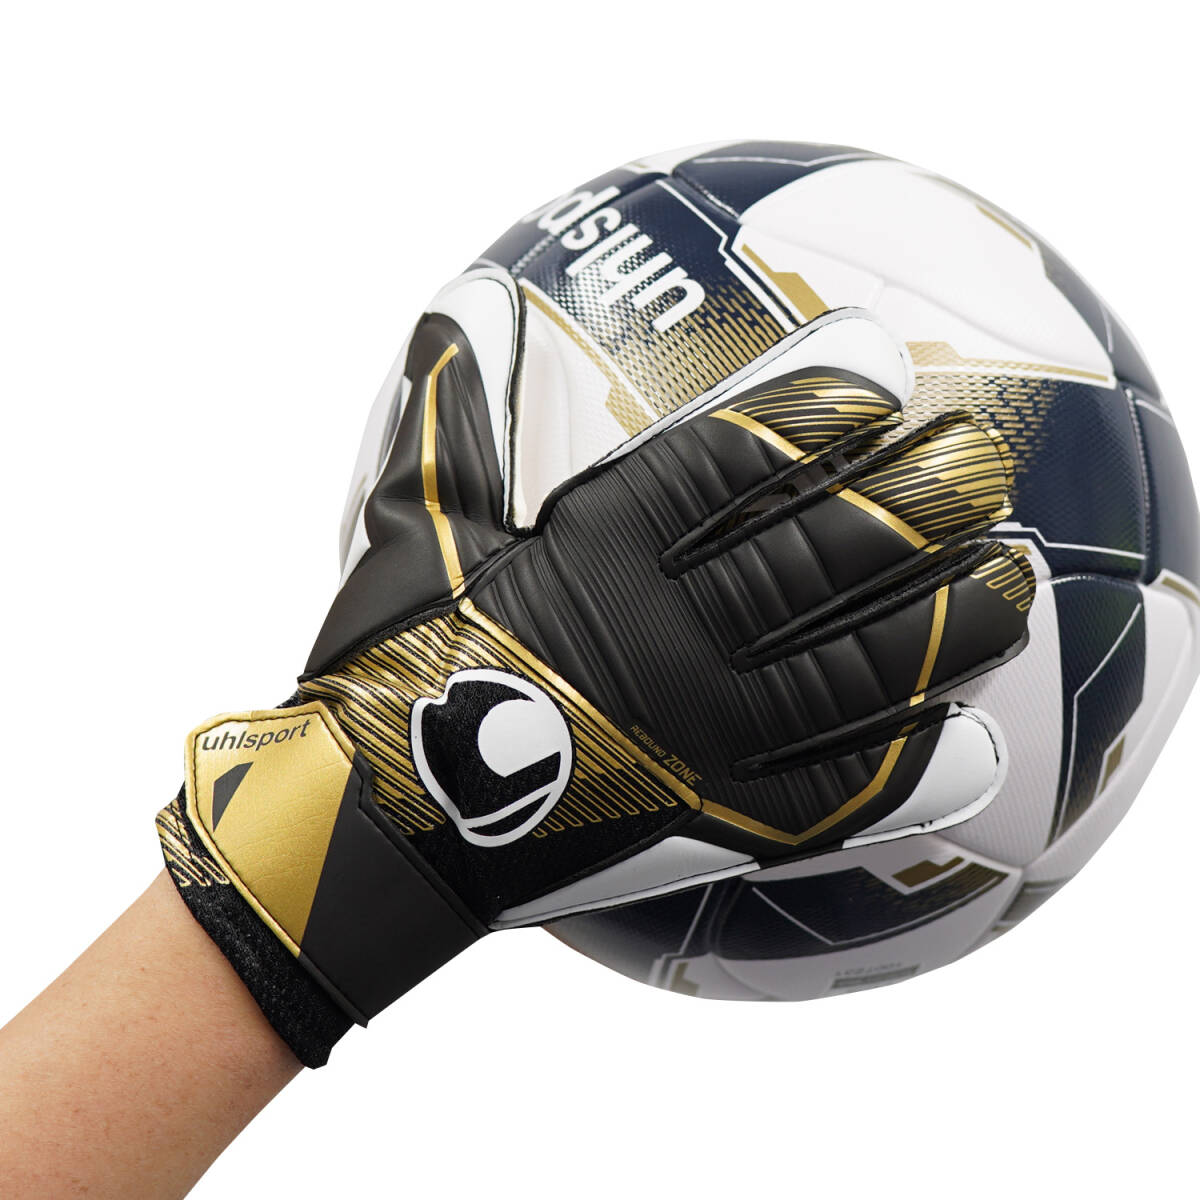  keeper glove /6 number / limitated model / wool sport / black x Gold / Junior /4180 jpy prompt decision 